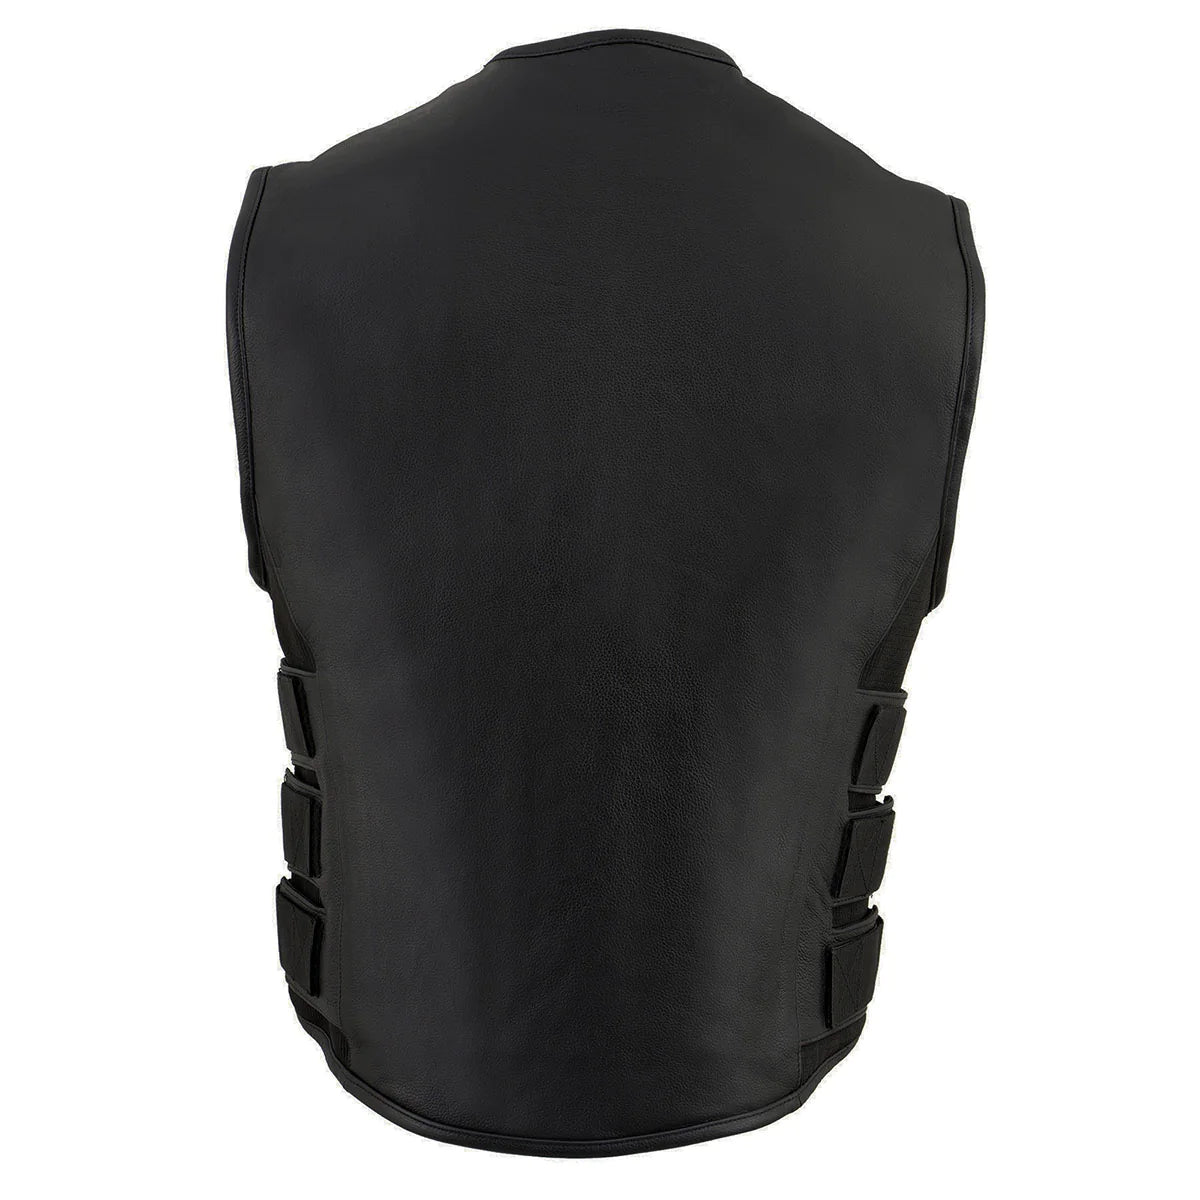 Men's 'Basher' Black SWAT Style Club Style Motorcycle Leather Vest